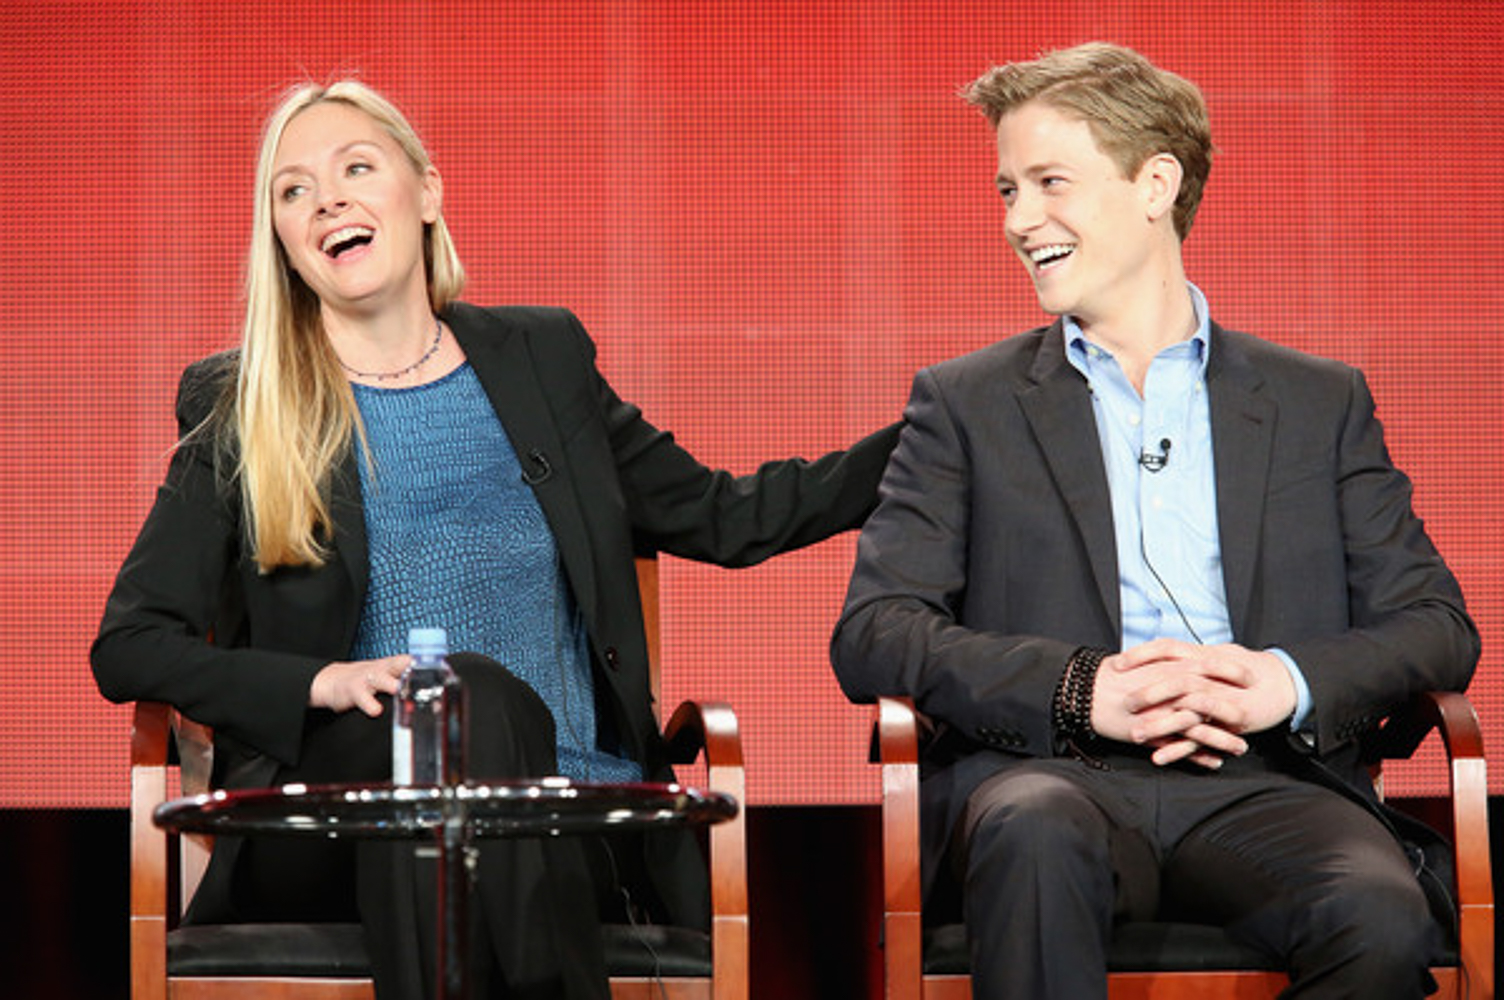 Actress Hope Davis (L) and actor Gavin Stenhouse speak onstage during the 'Allegiance' panel discussion at the NBC/Universal portion of the 2015 Winter TCA Tour at the Langham Hotel on January 16, 2015 in Pasadena, California.